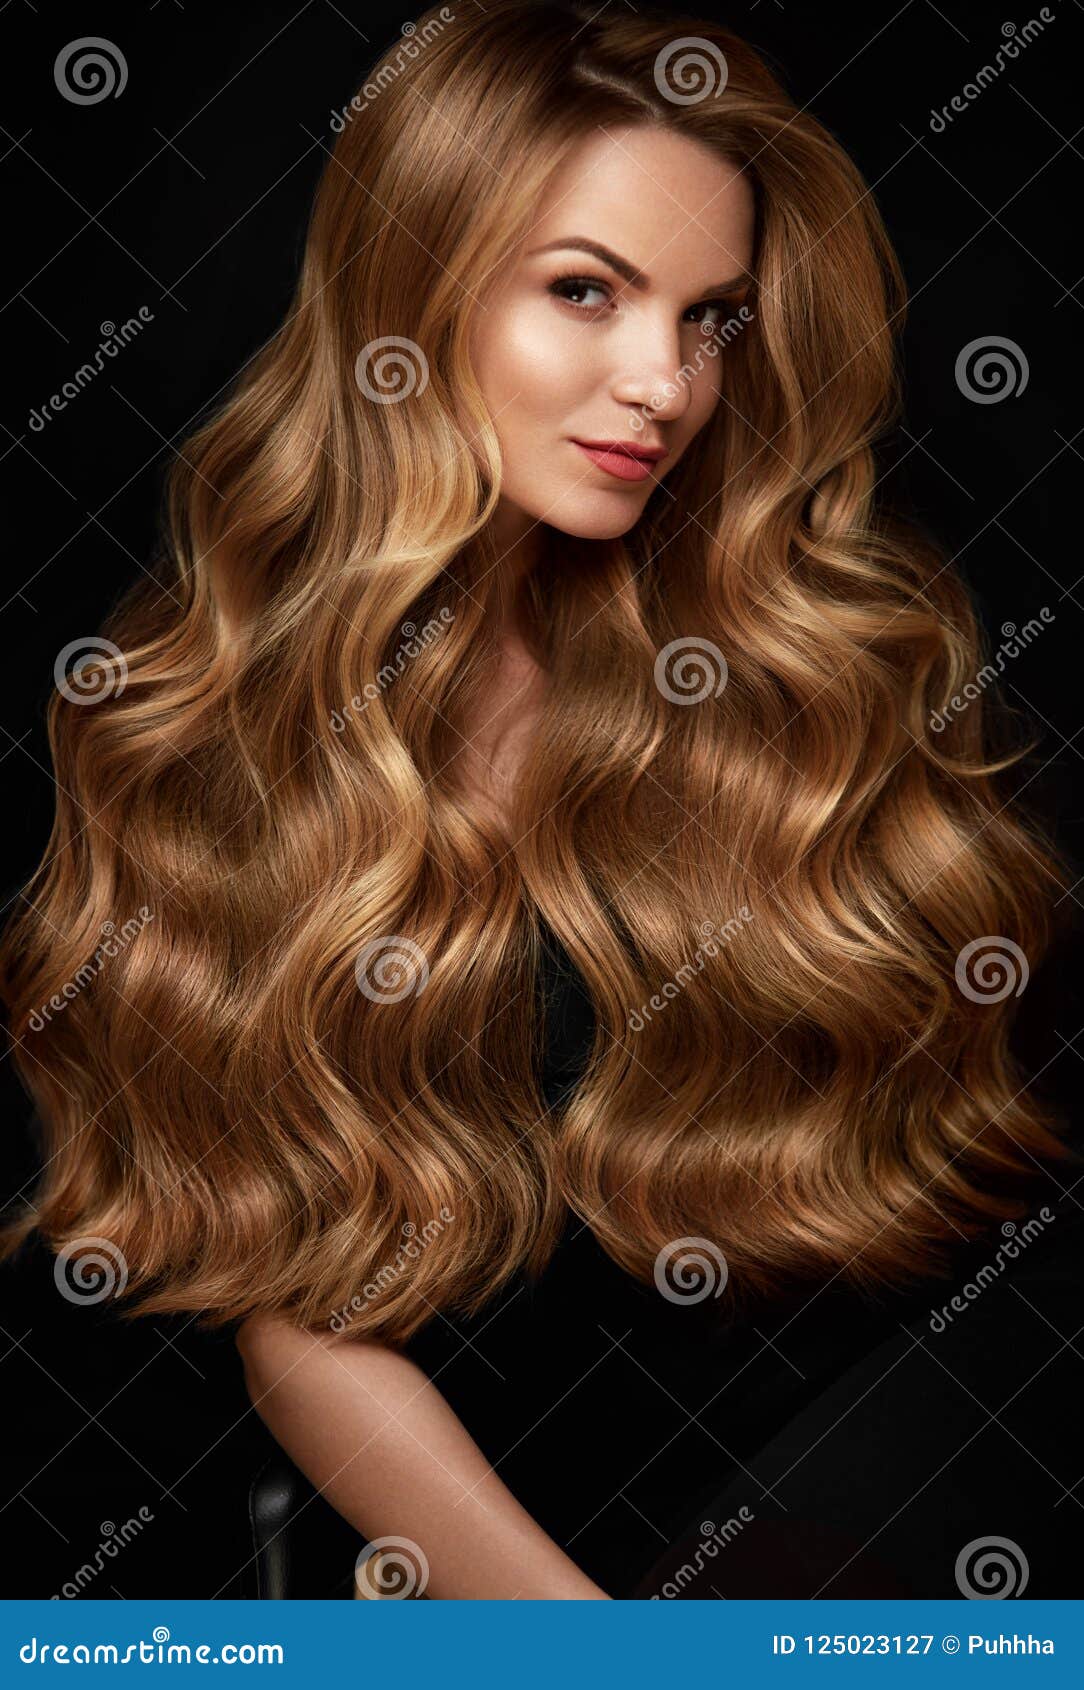 Long Blonde Hair. Woman with Wavy Hairstyle, Beauty Face Stock Image -  Image of luxury, glamour: 125023127